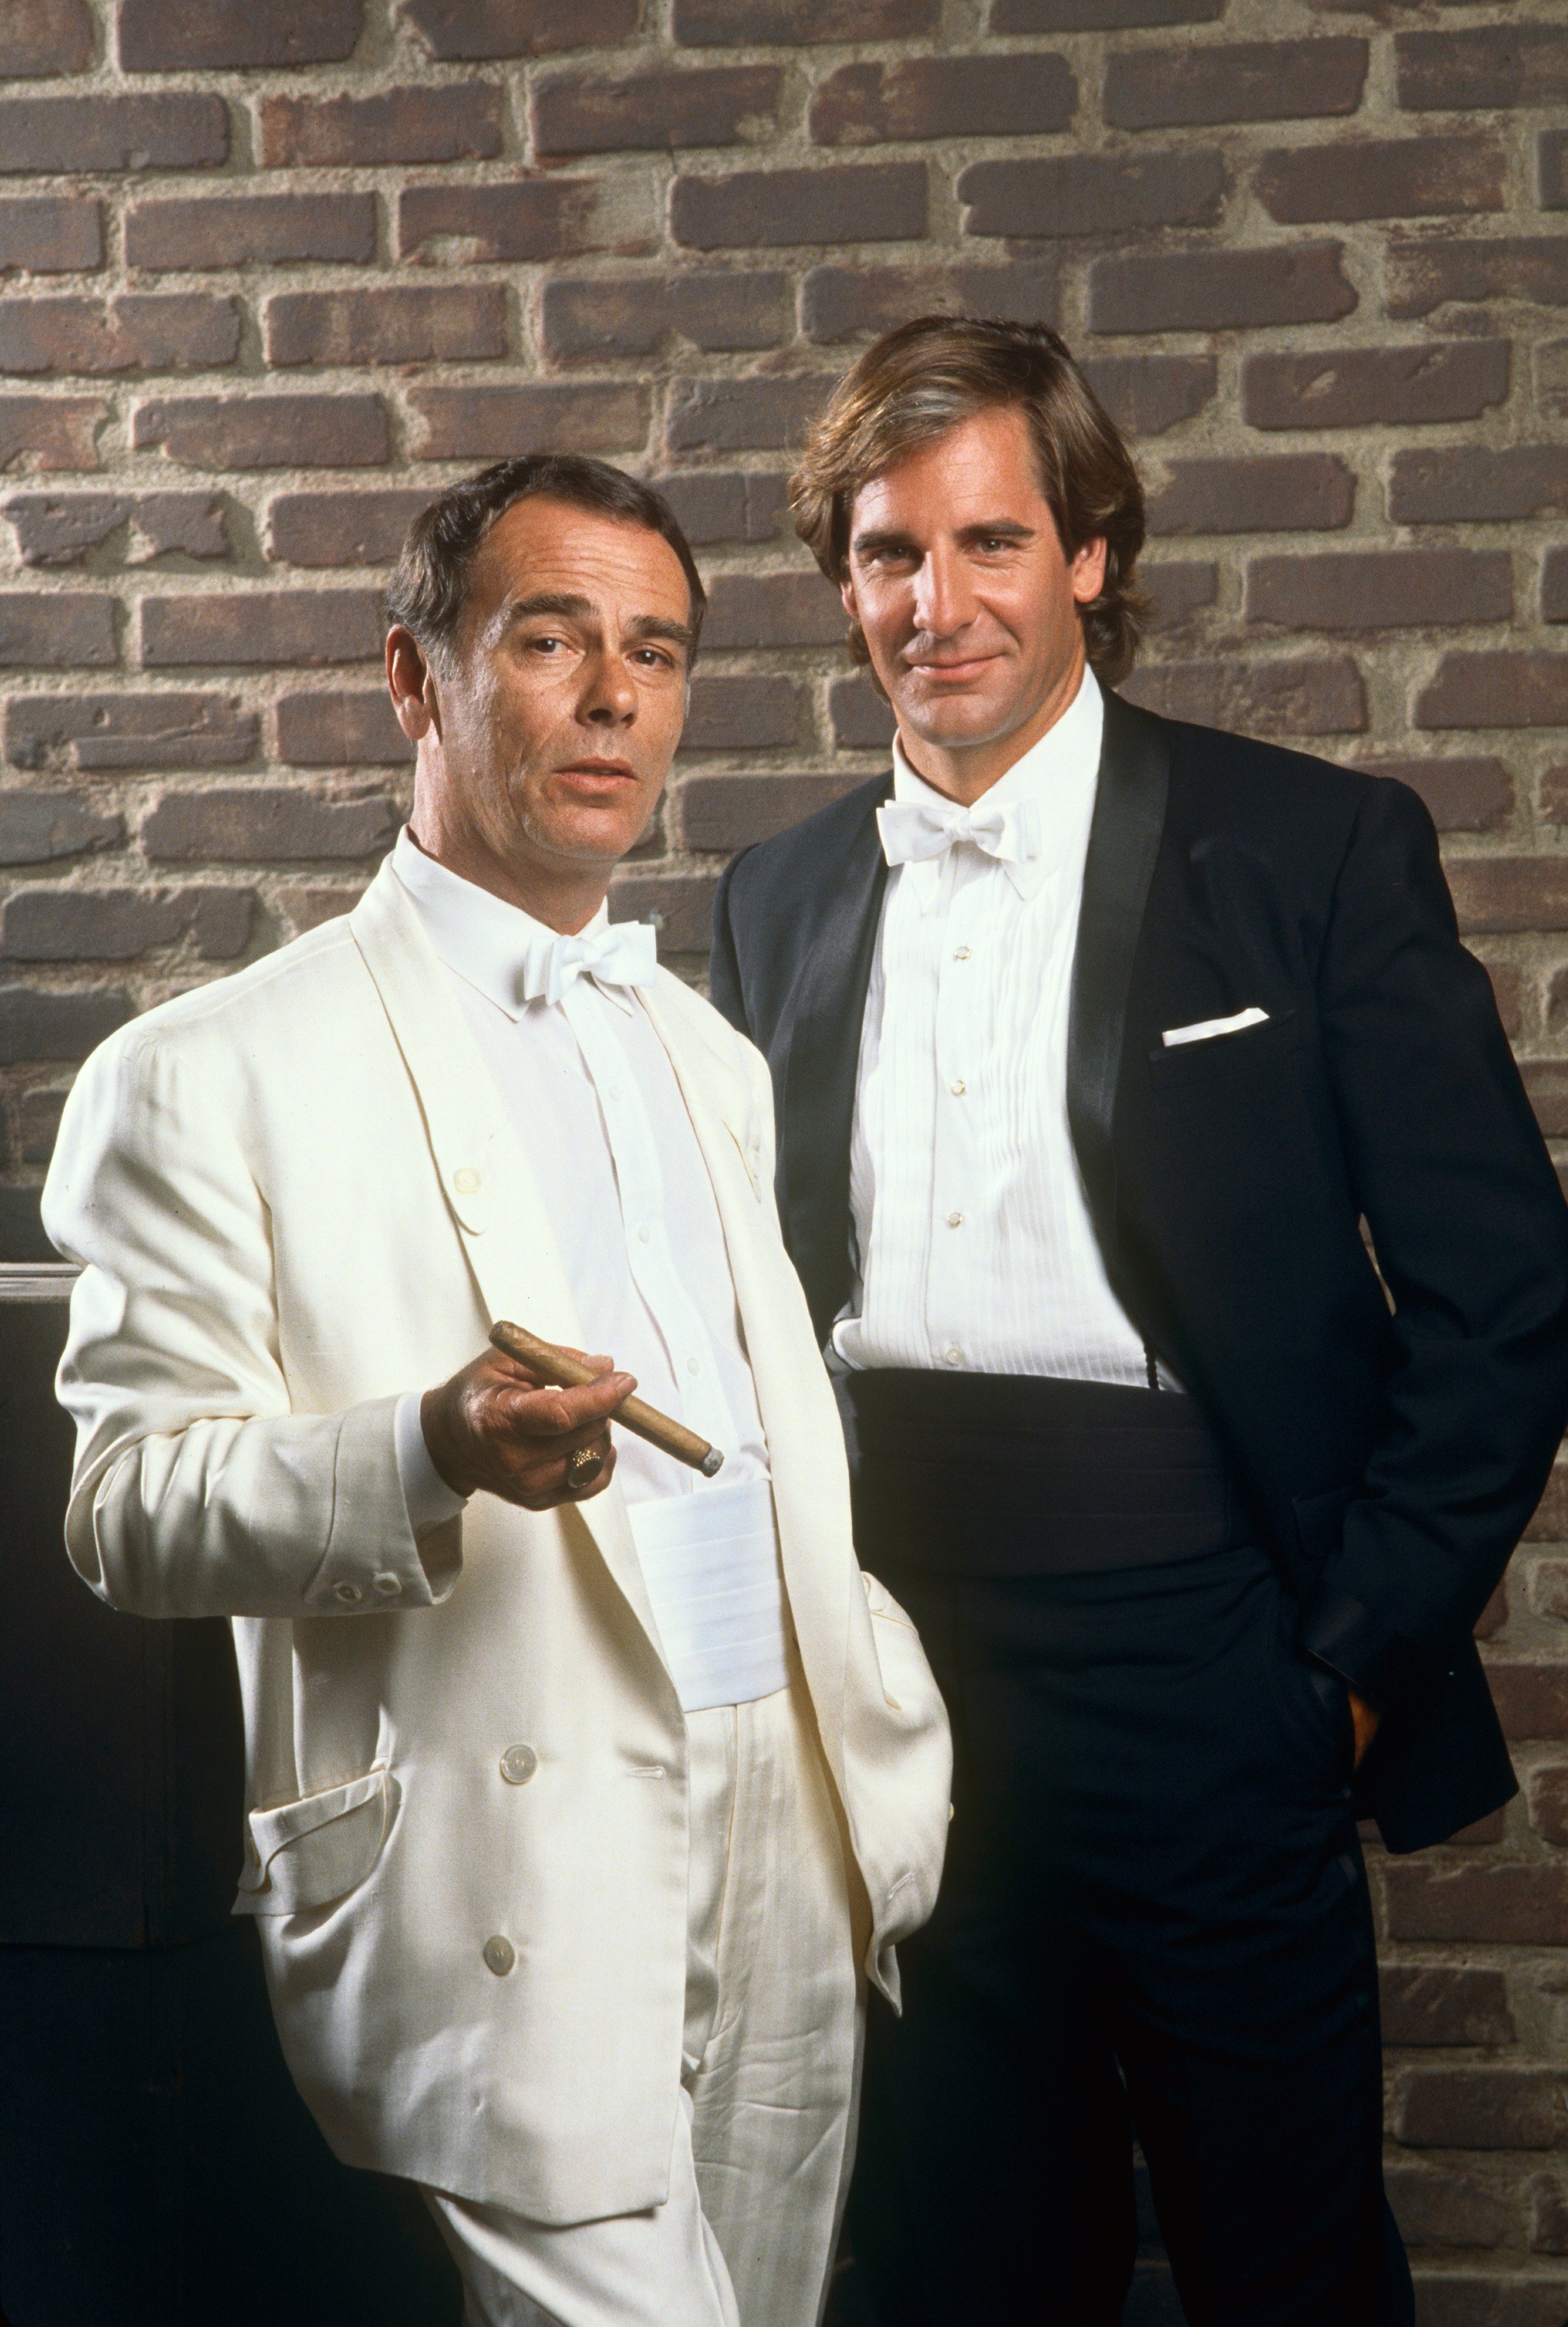 Stars of TV's "Quantum Leap," Dean Stockwell (left) and Scott Bakula, pose in character during a 1989 Hollywood, California, photo portrait session. | Source: Getty Images.